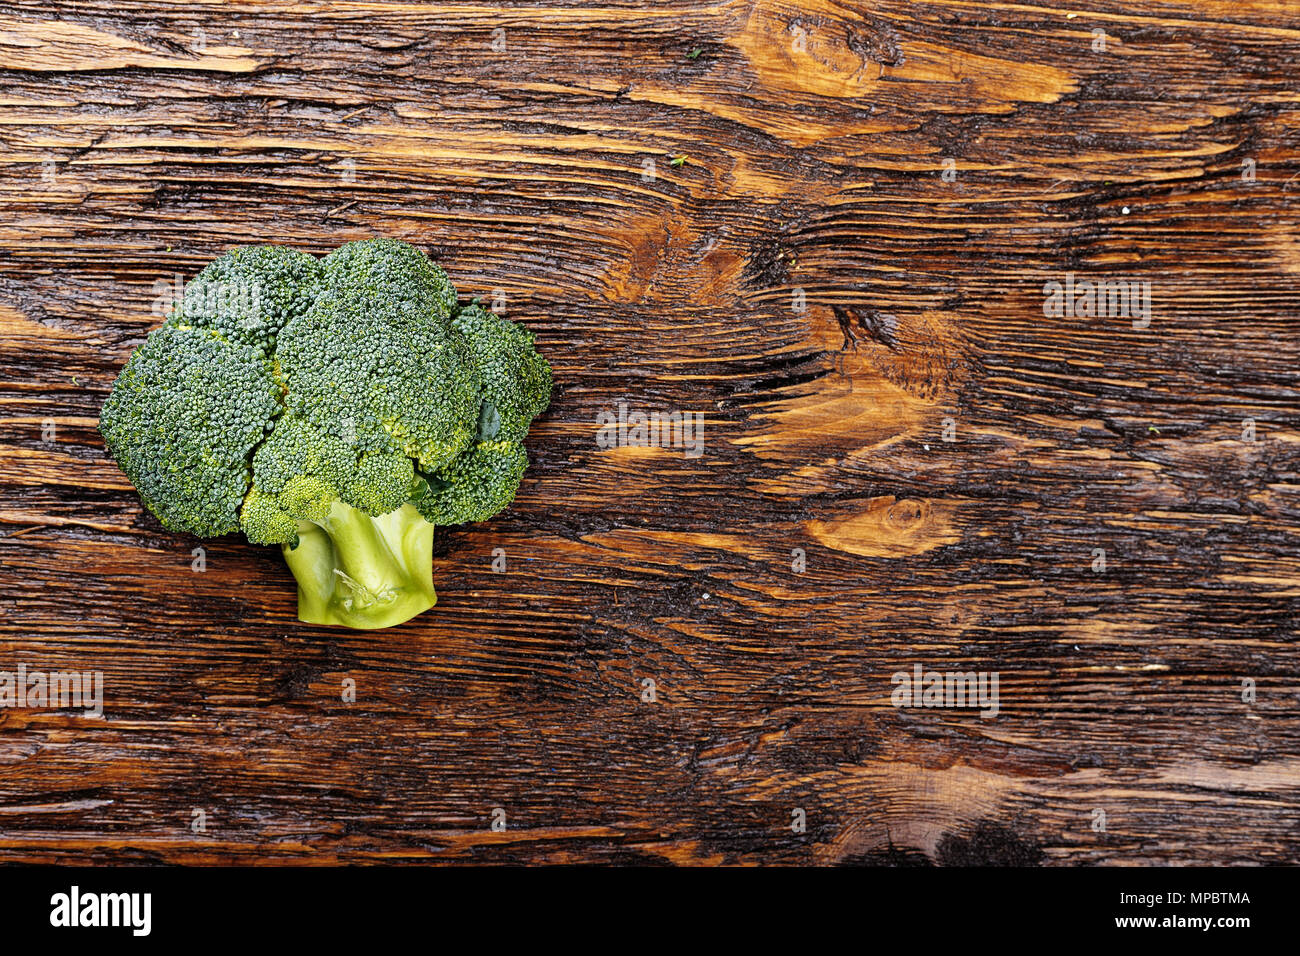 Inflorescence of raw broccoli on a wooden table, horizontal photo Stock Photo